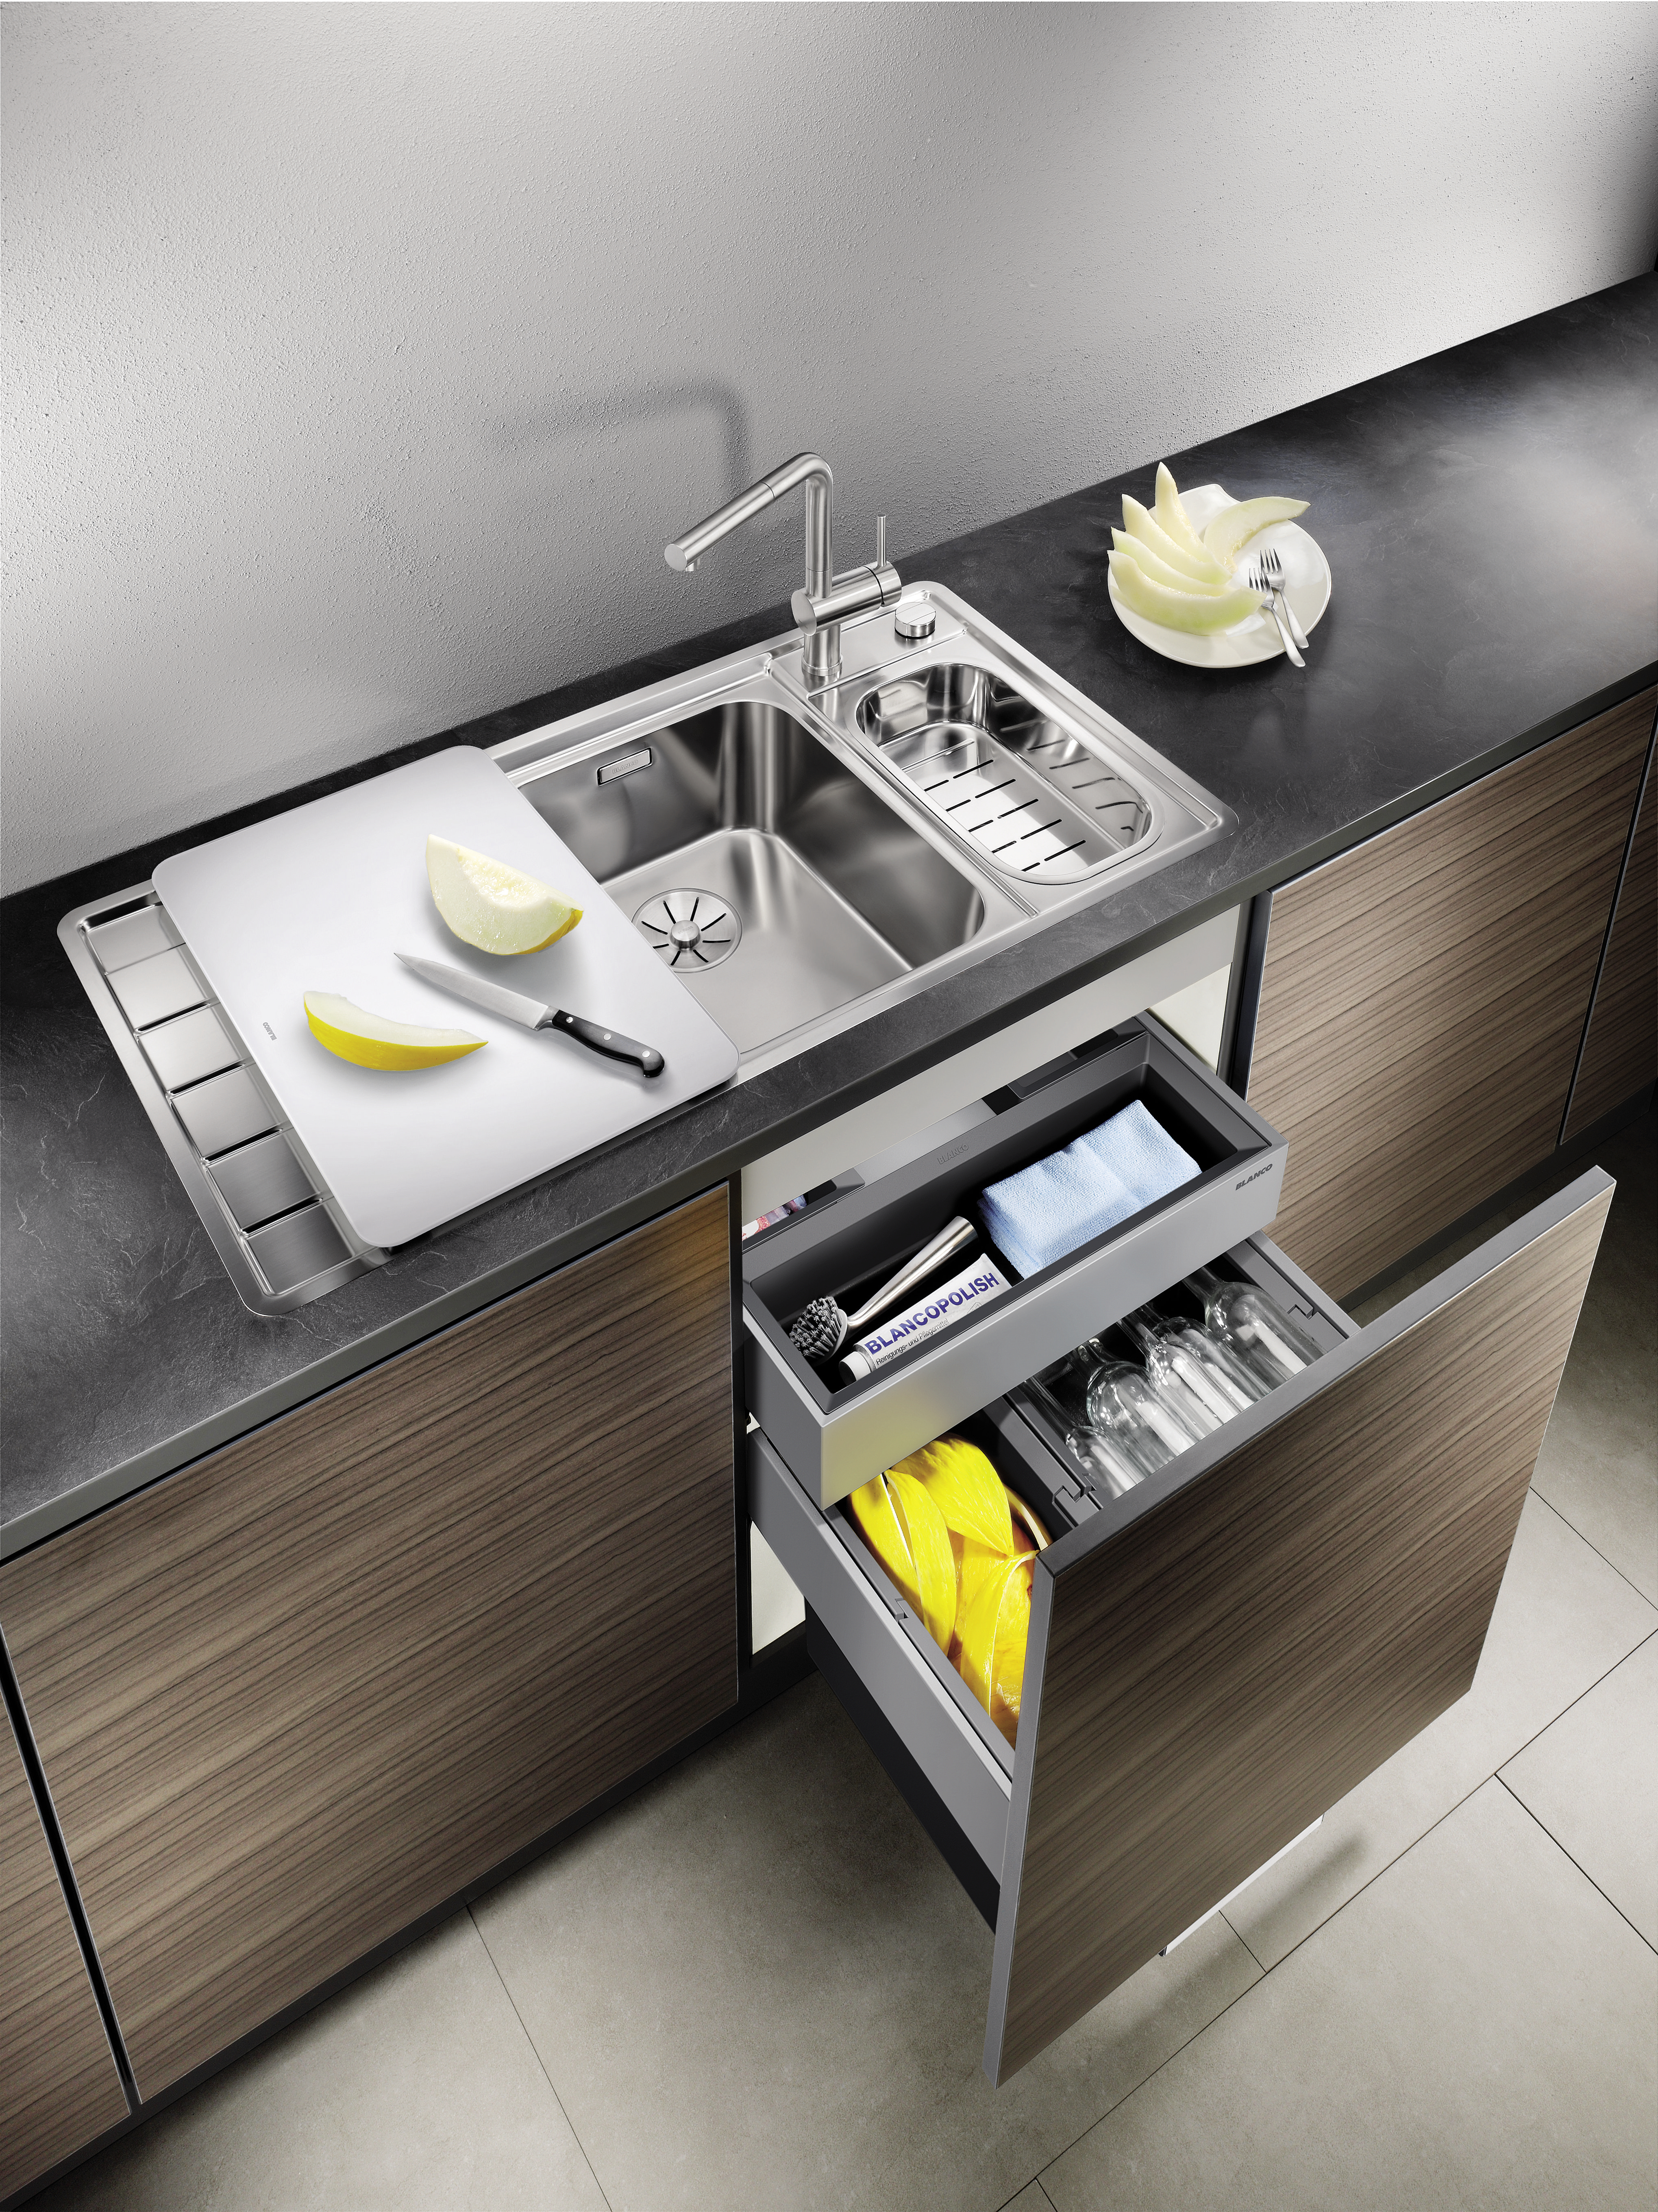 The pull-out organiser drawer stores your sponges, dishwashing brushes and the like so that they are always within reach.